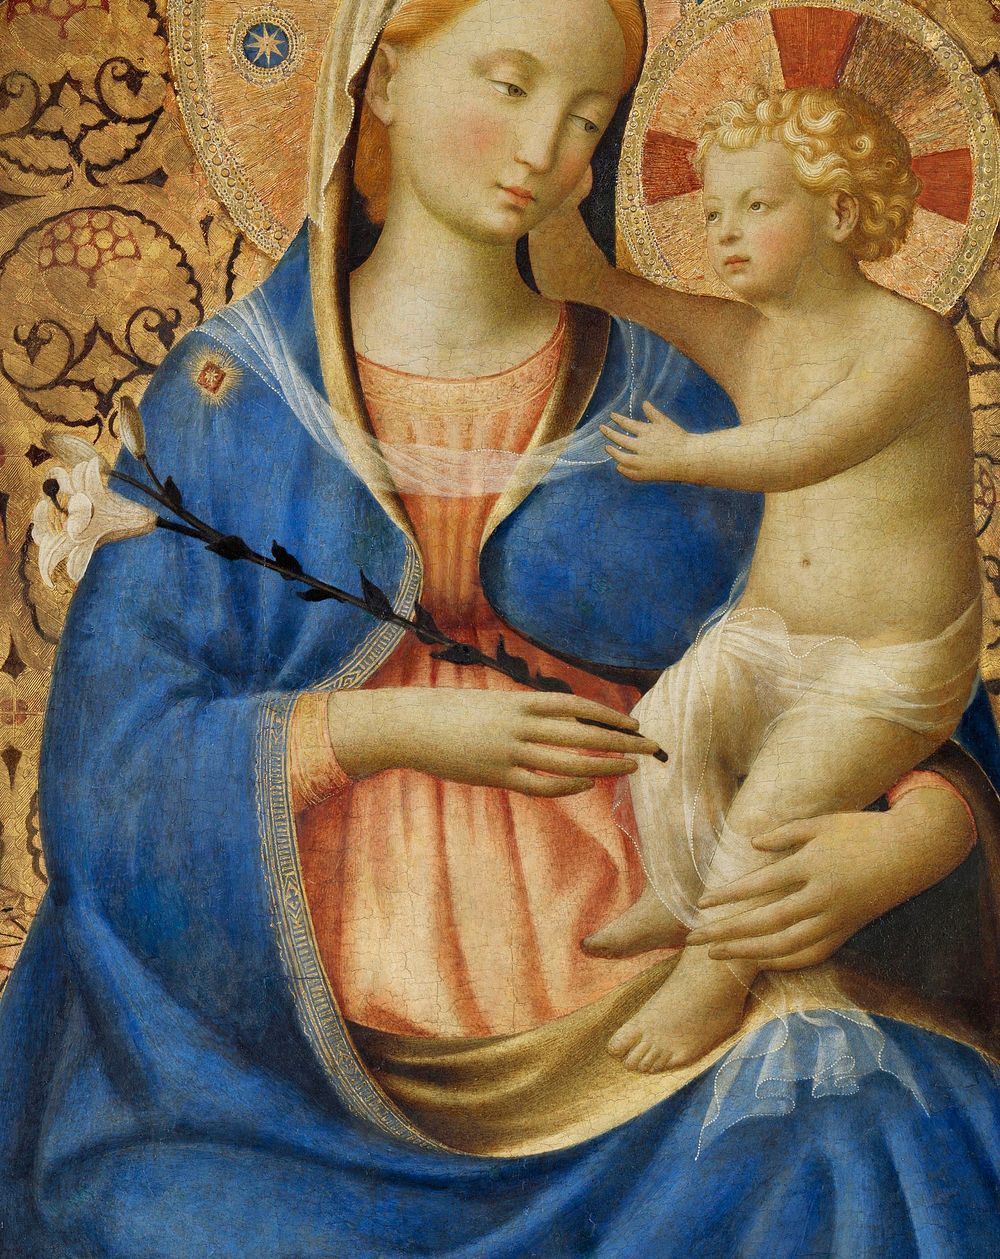 Madonna of Humility (1440) by Fra Angelico. Original from The Rijksmuseum. Digitally enhanced by rawpixel.